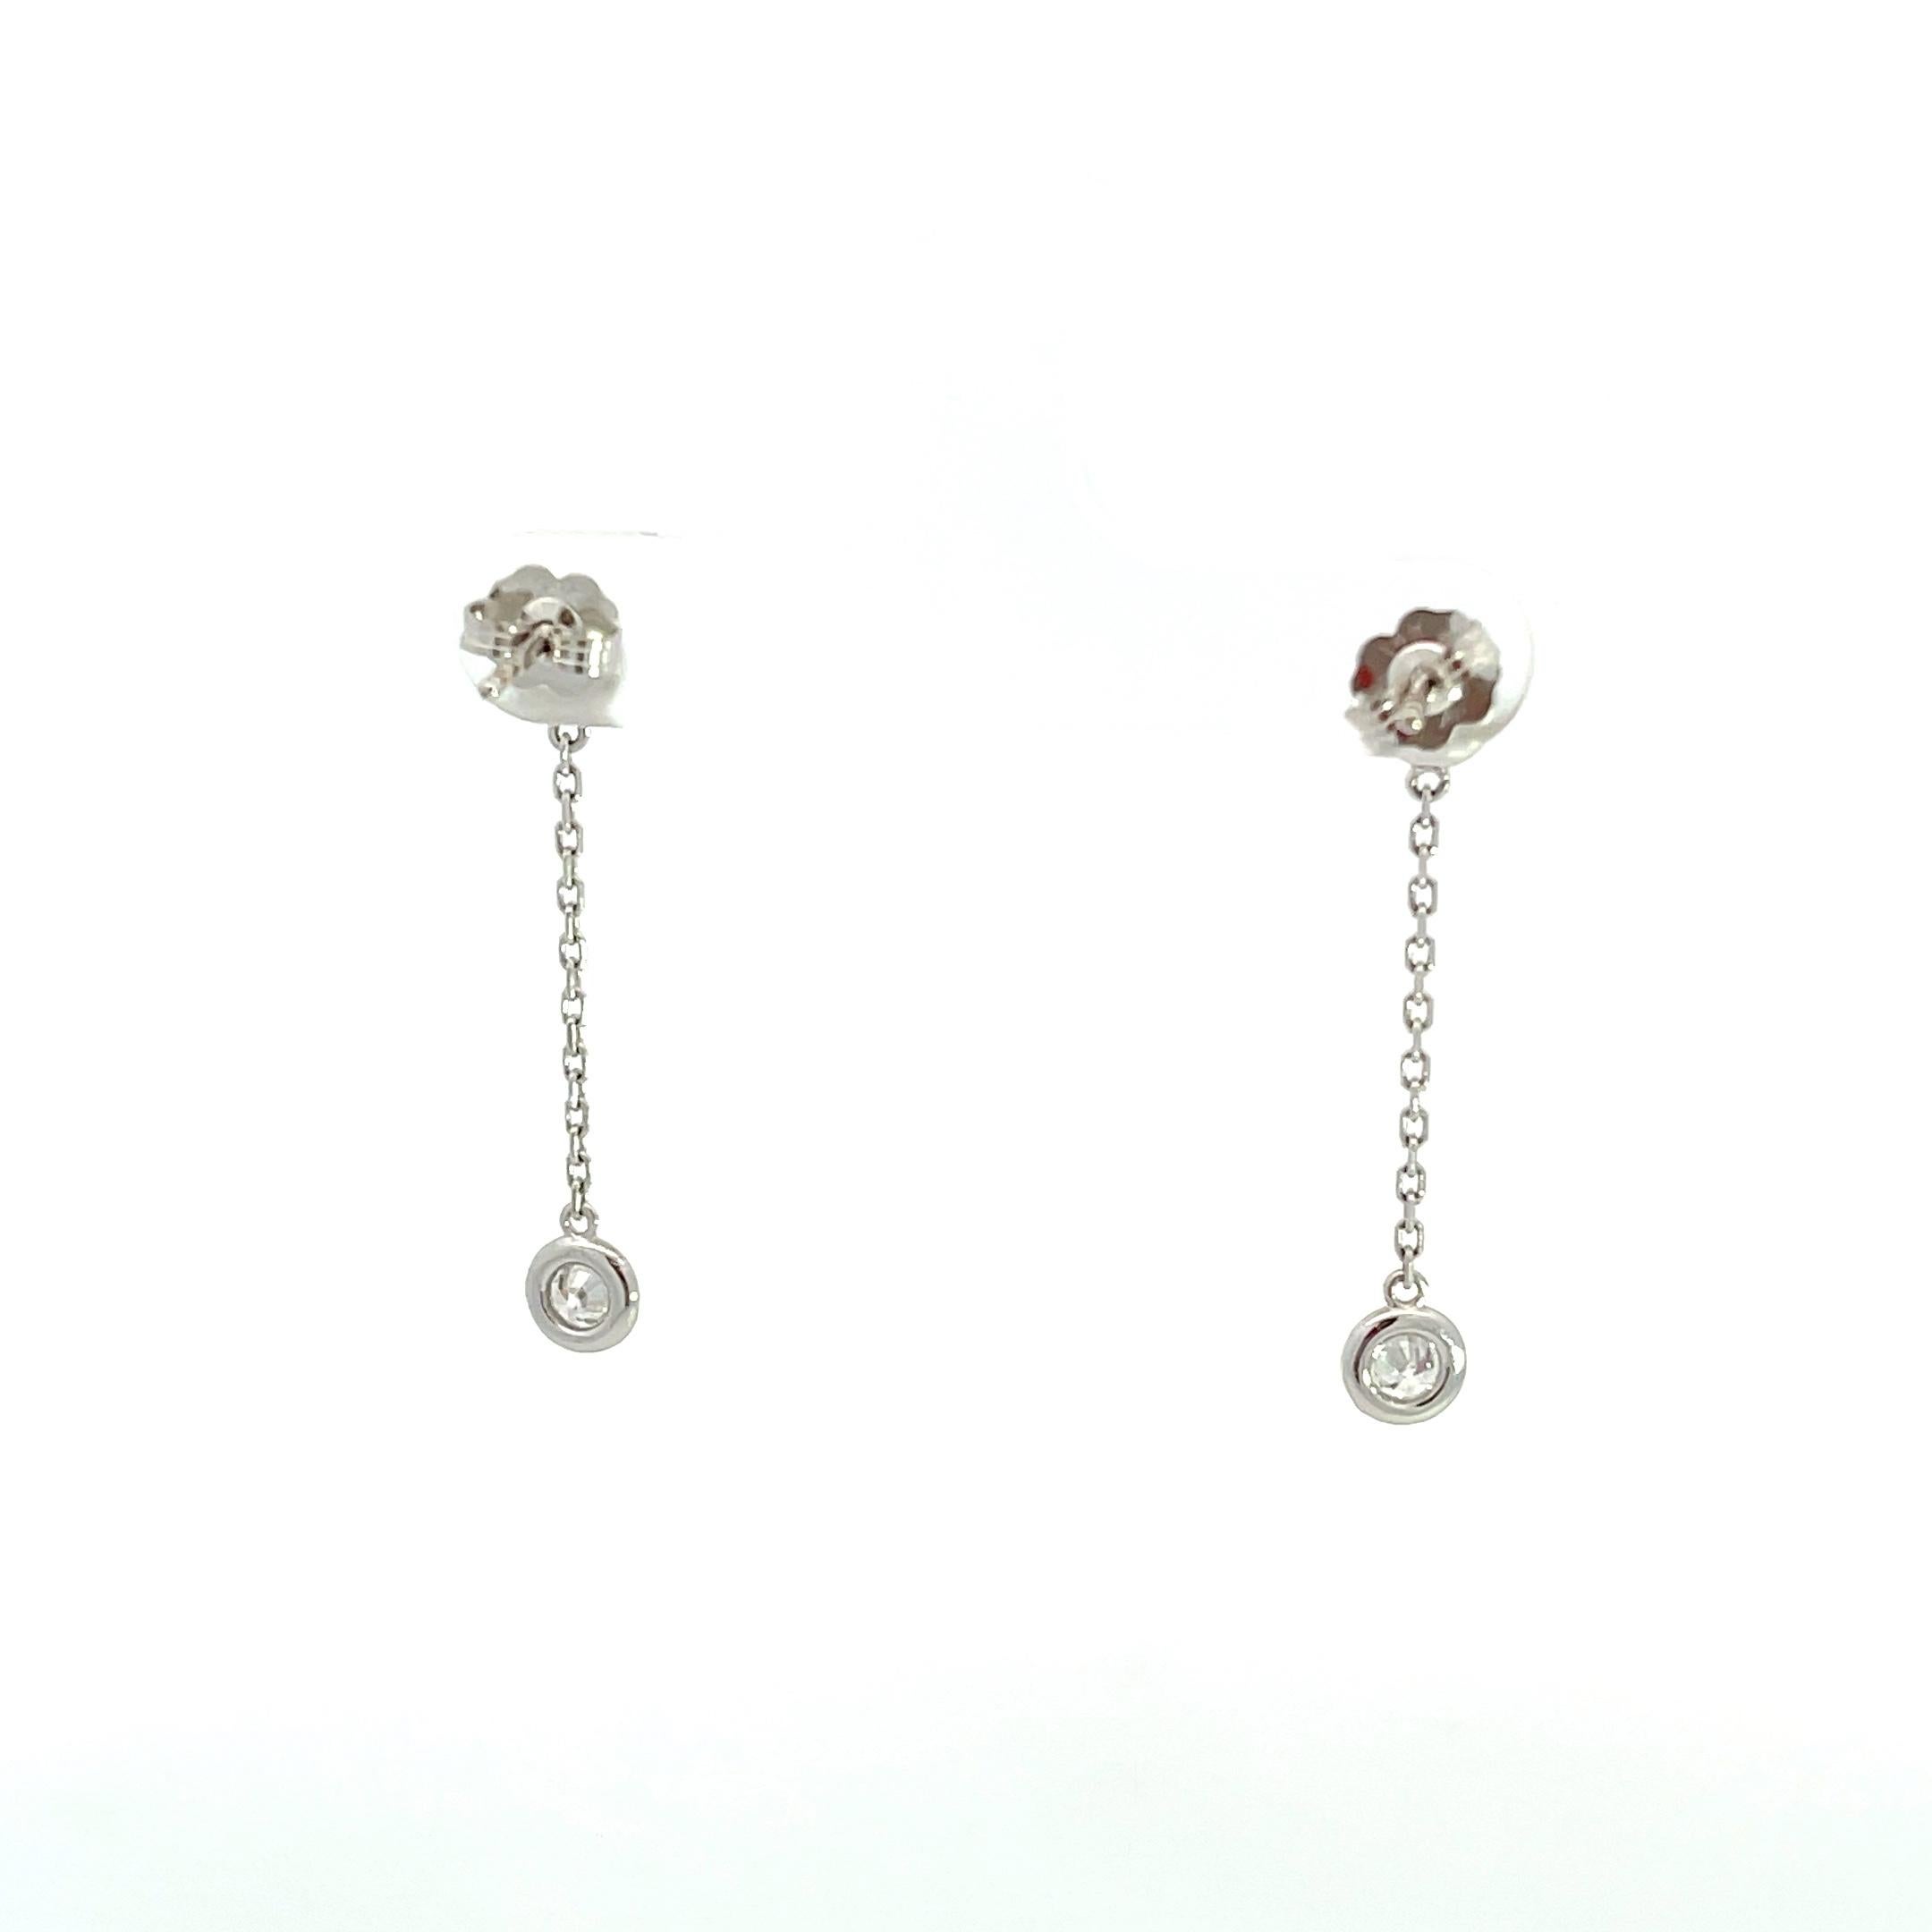 Introducing elegance redefined with our exquisite 14K White Gold 0.75ctw Diamonds by the Yard Drop Earrings. Radiate timeless charm and sophistication with these captivating earrings that effortlessly blend classic design with modern flair. Crafted